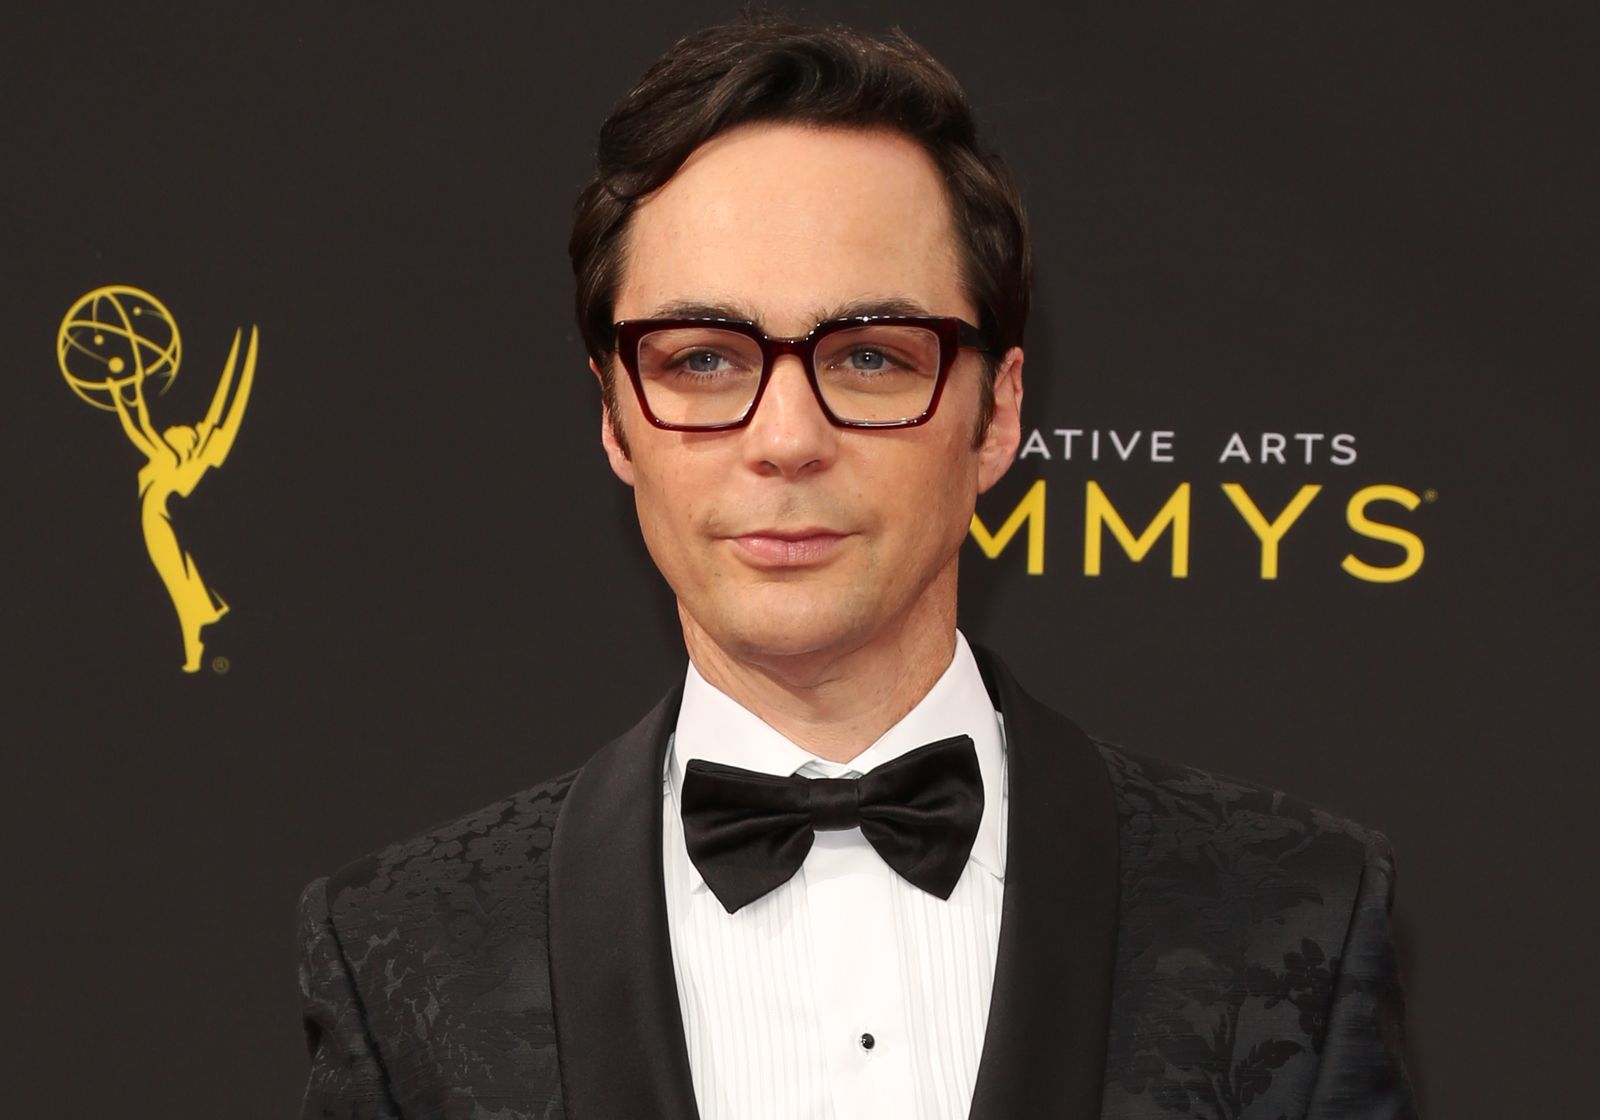 Jim Parsons at the Creative Arts Emmy Awards on September 15, 2019, in Los Angeles, California | Photo: Paul Archuleta/FilmMagic/Getty Images